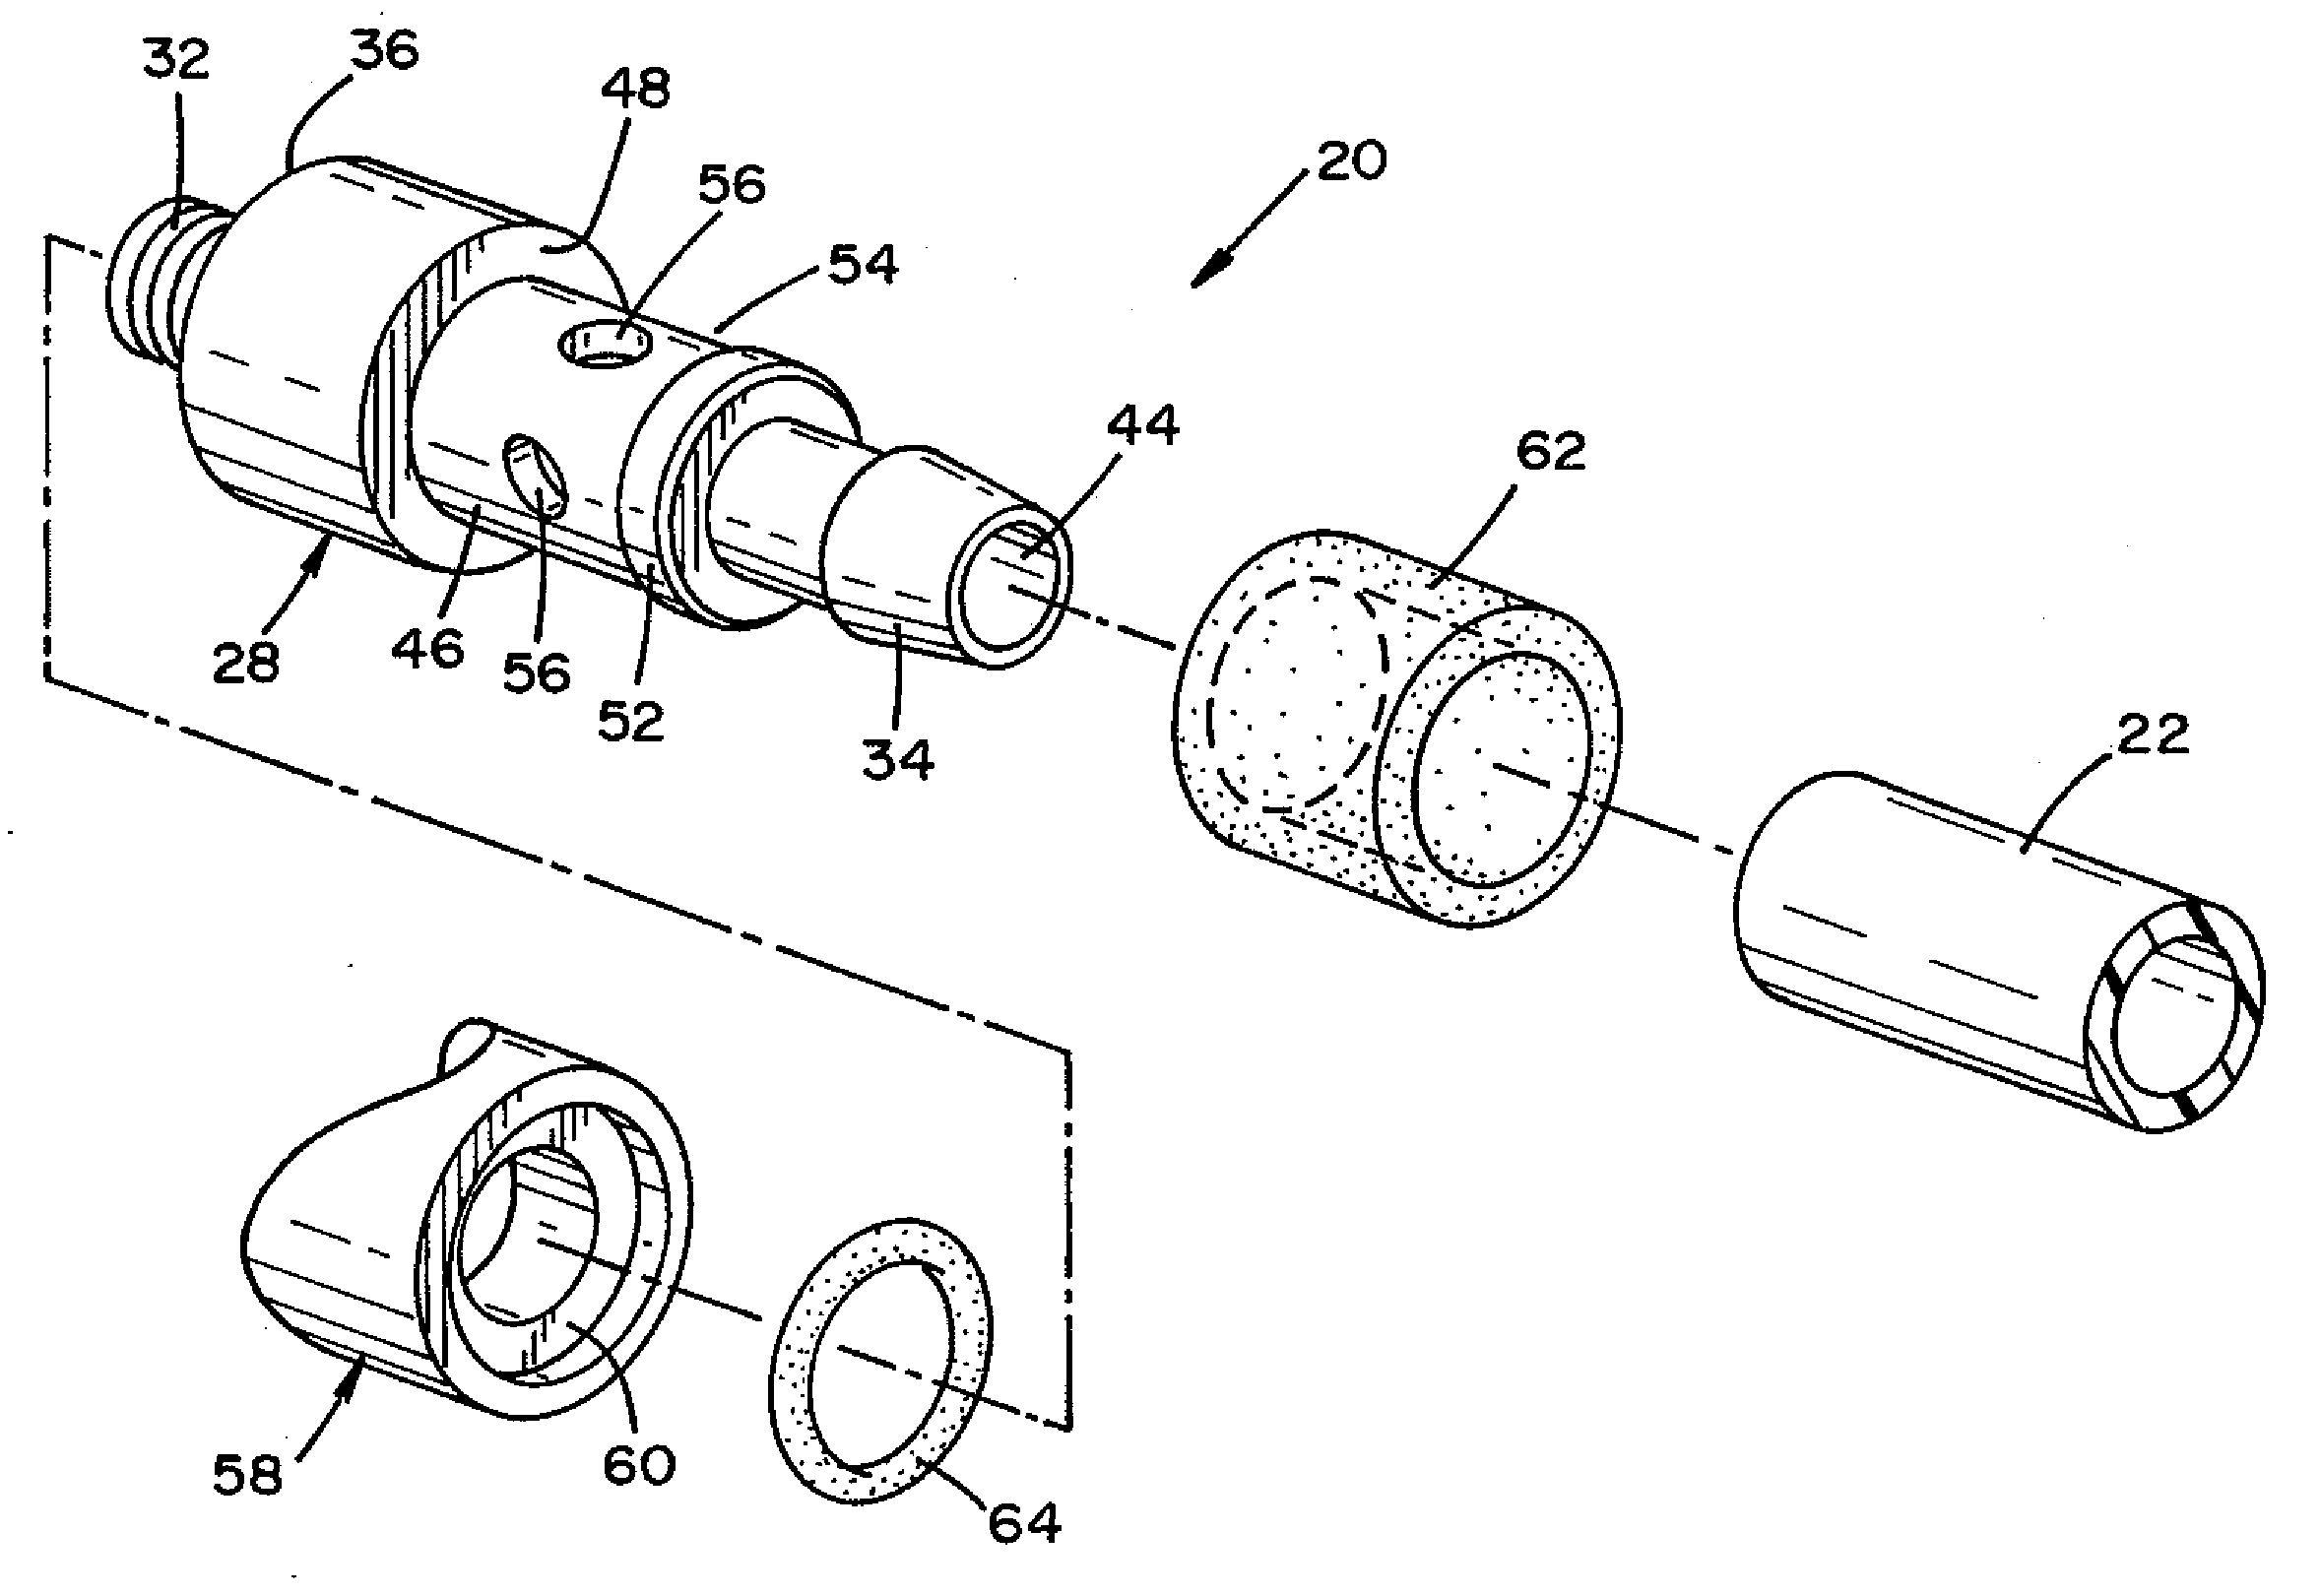 Instrument holder and connector